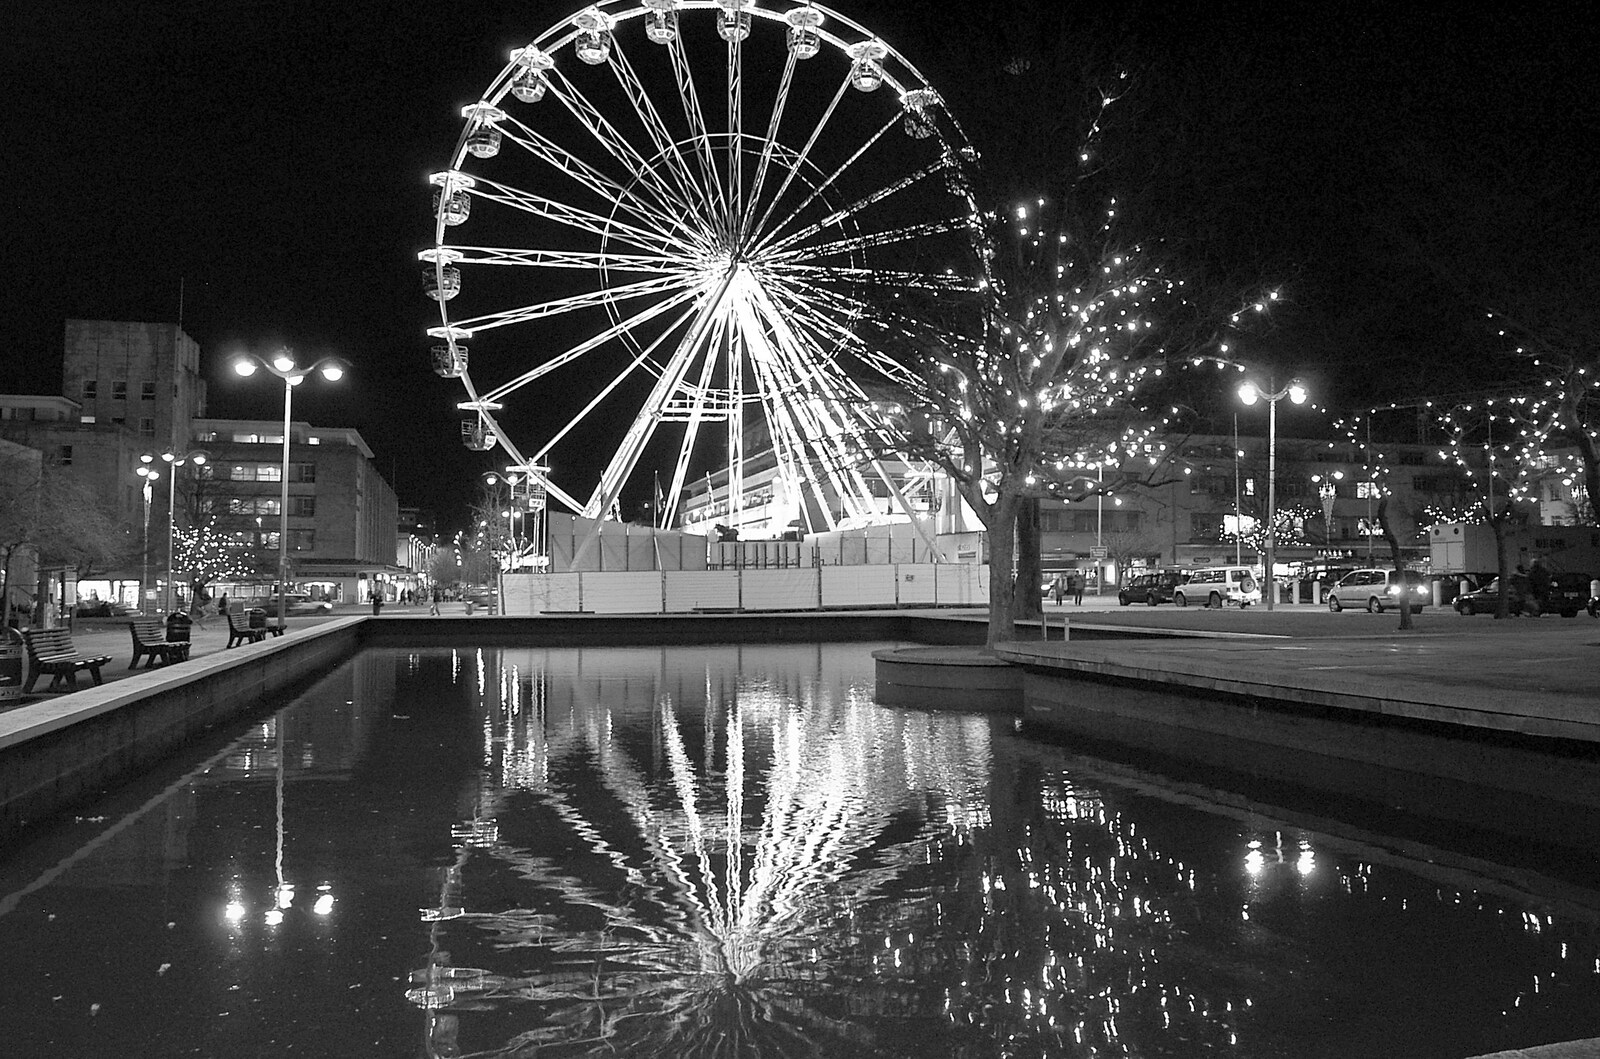 A Ferris wheel reflected in the Civic Centre pond from Uni: A Polytechnic Reunion, Plymouth, Devon - 17th December 2005